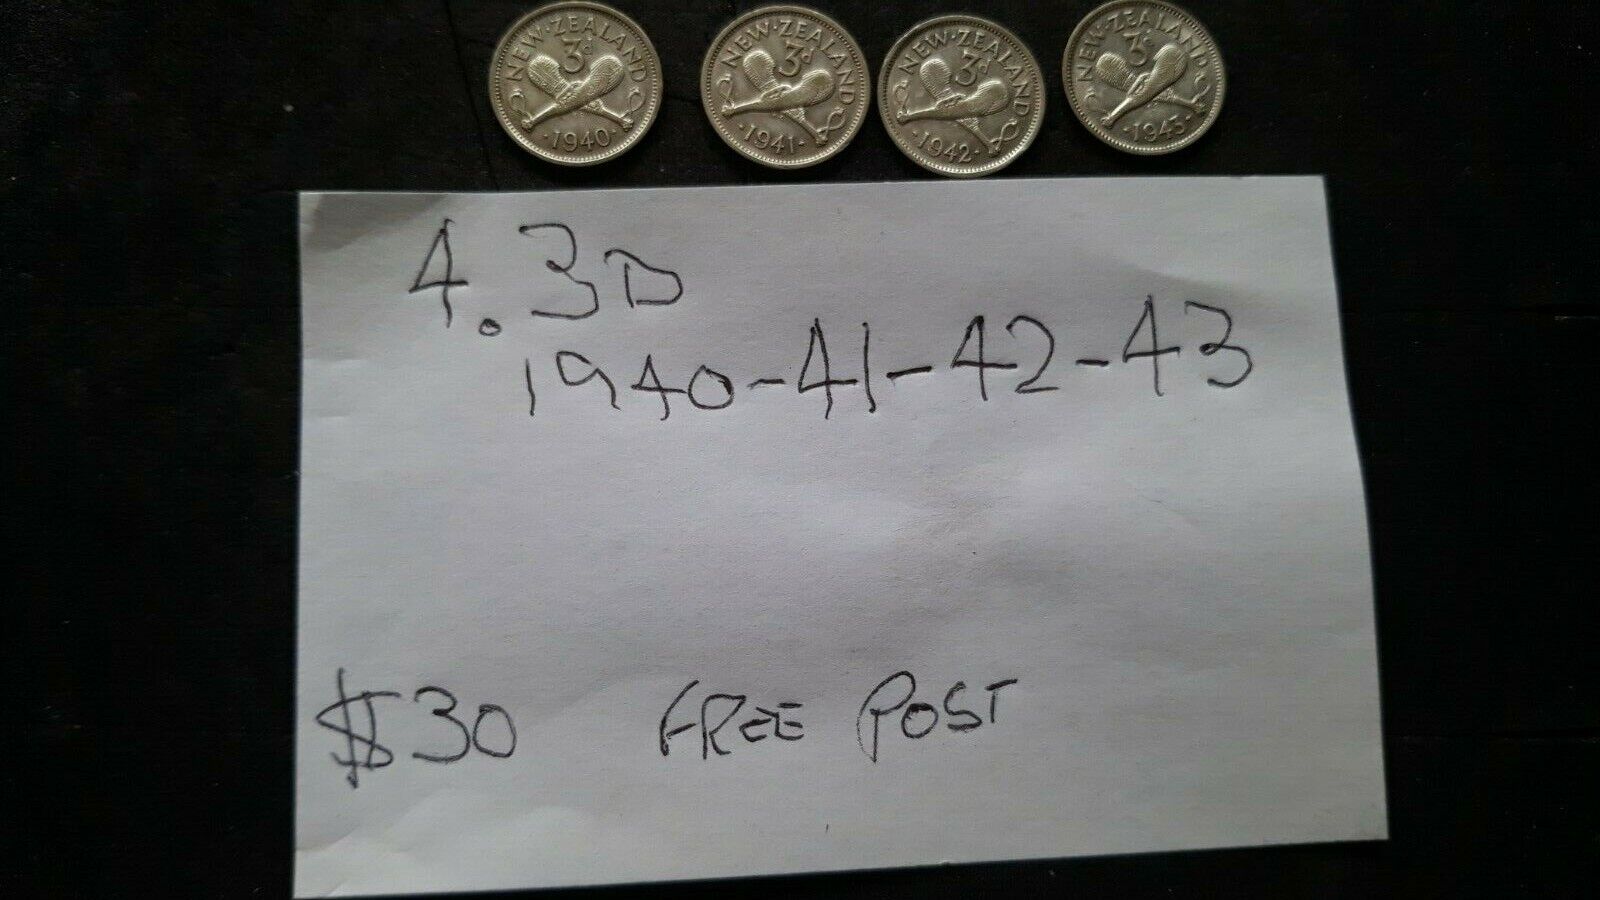 new Zealand coins 3ds see photos x4 1940 41 42 43  $30  post $2  Без бренда